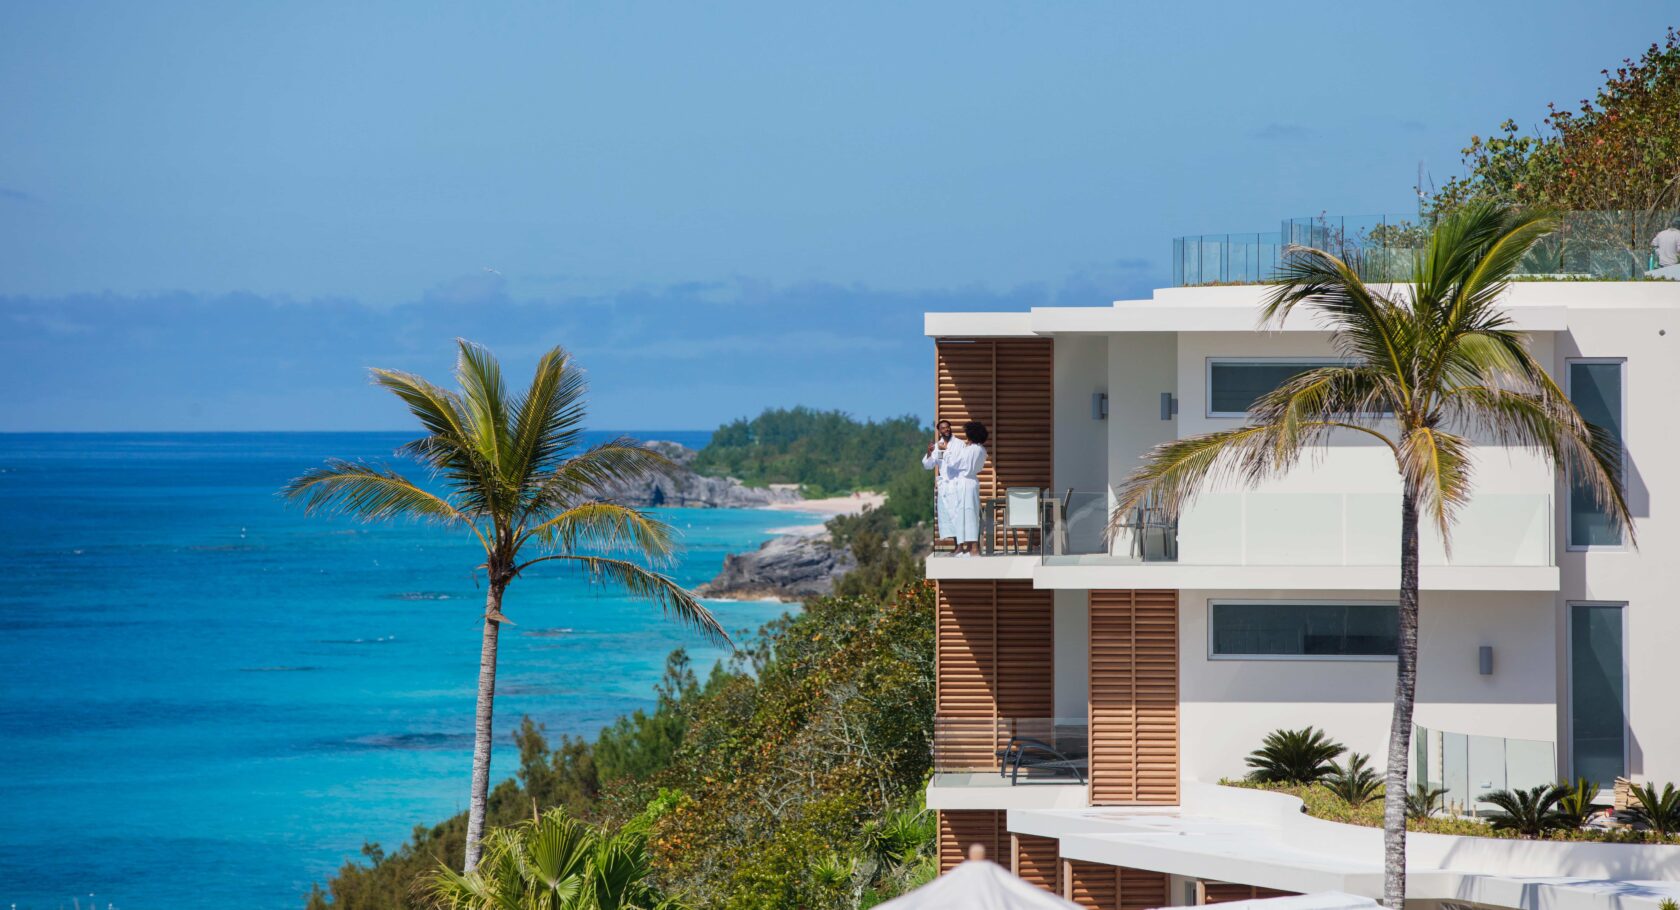 A man is standing on a balcony with a view of the ocean on his Bermuda vacation.